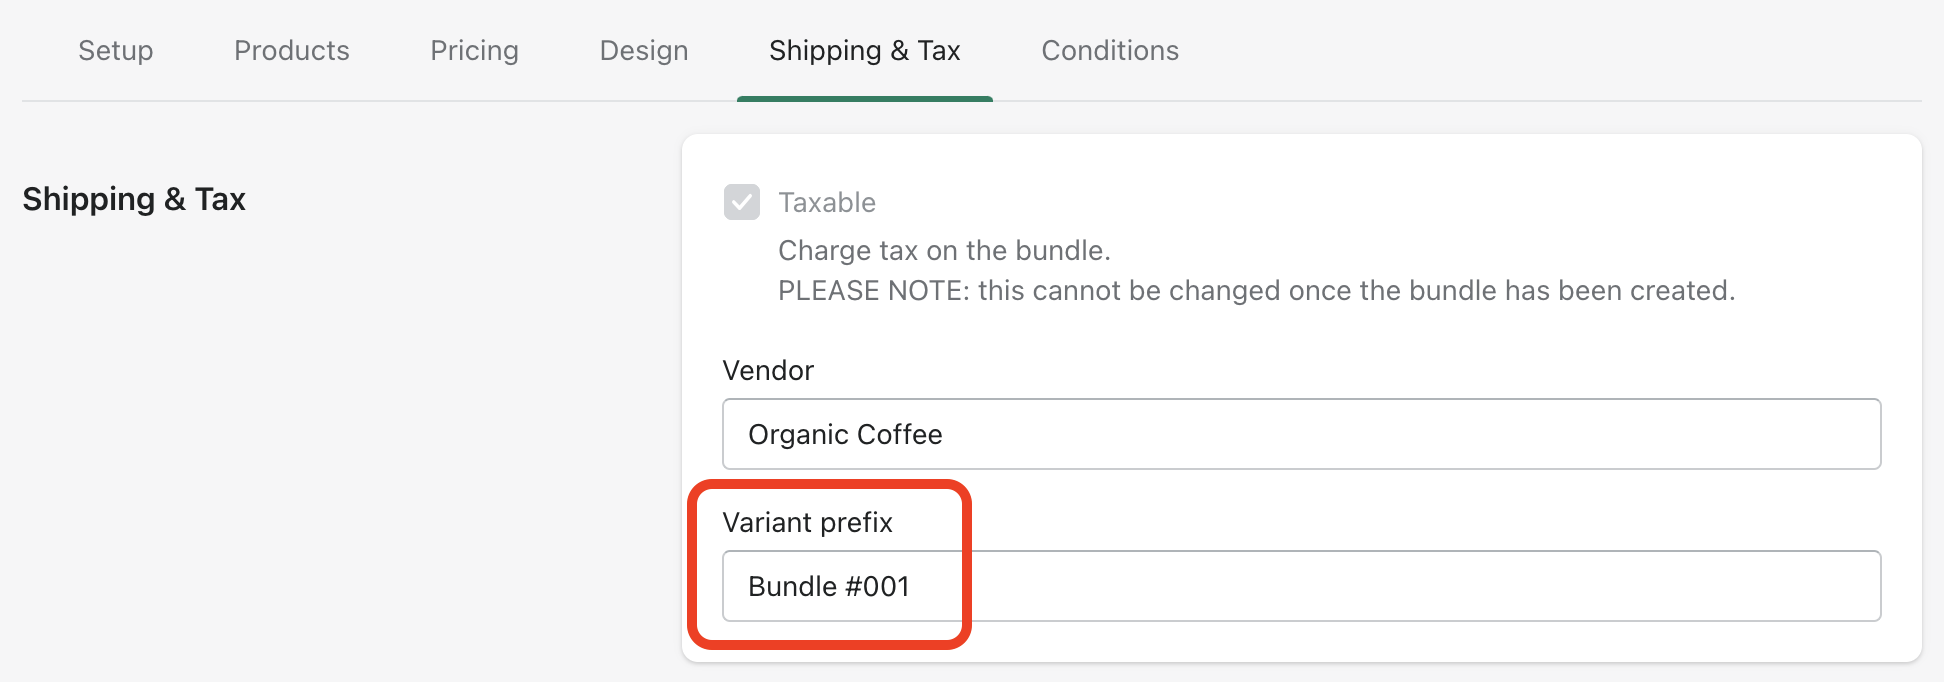 Shipping and Tax - Variant Prefix 2.png